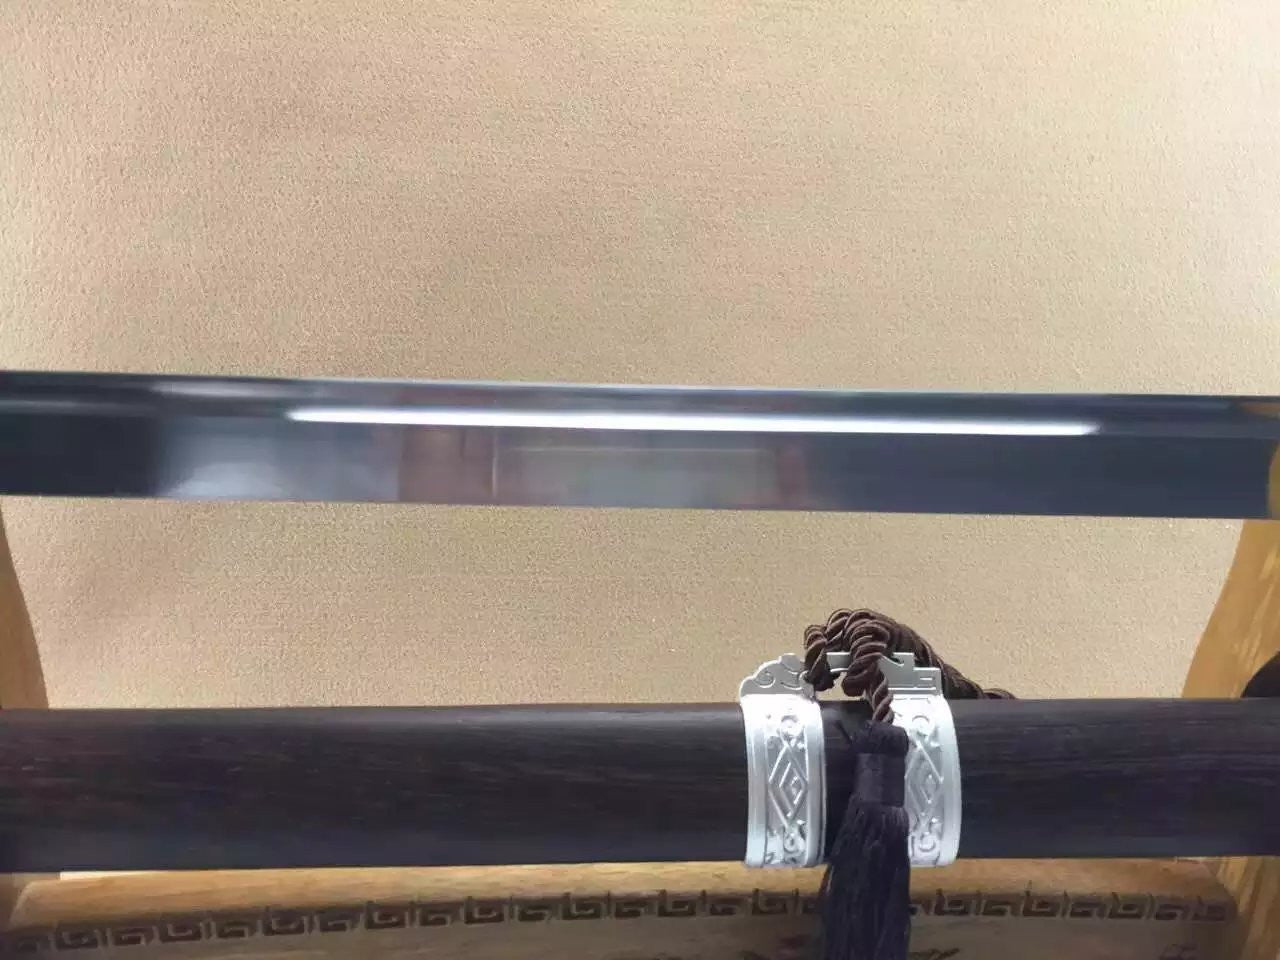 Wolong sword,High manganese steel,Rosewood scabbard,Alloy fitting,Length 39 inch - Chinese sword shop